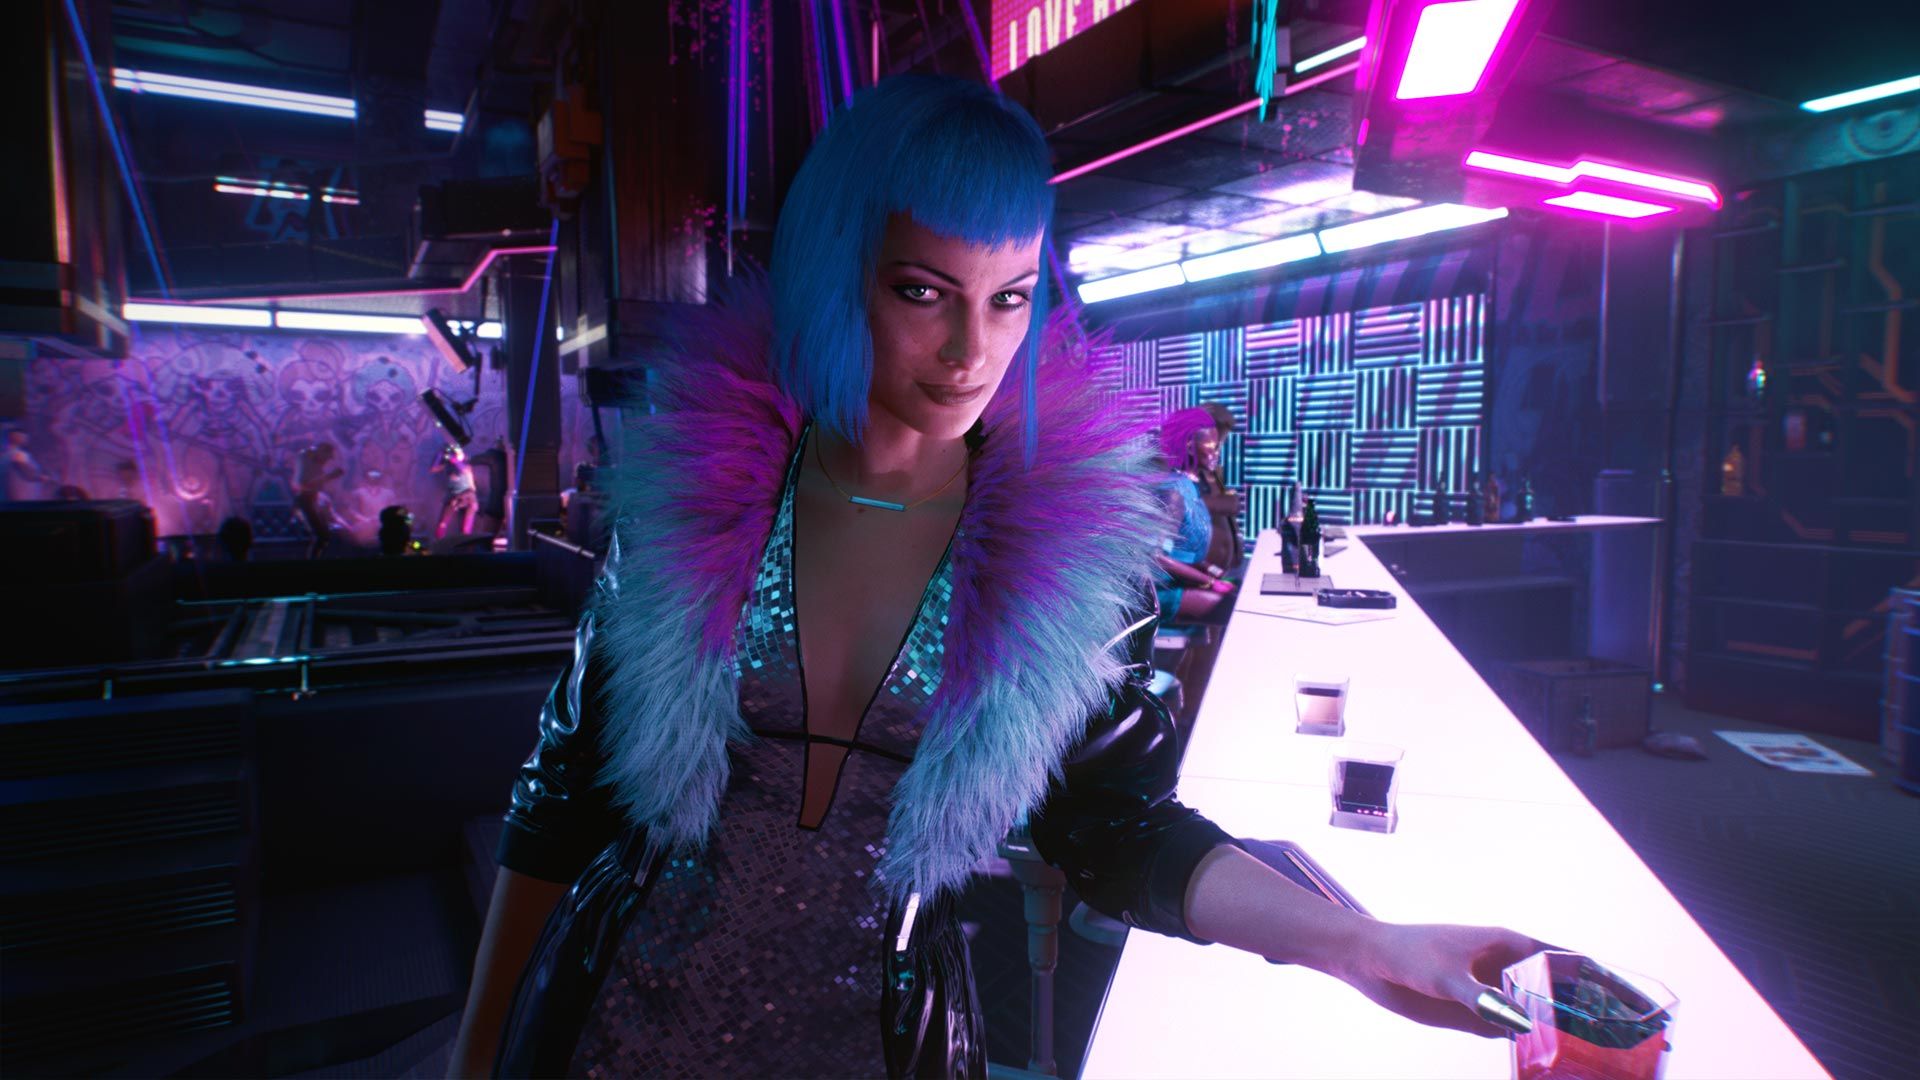 Cyberpunk 2077 launches on Stadia on November 19